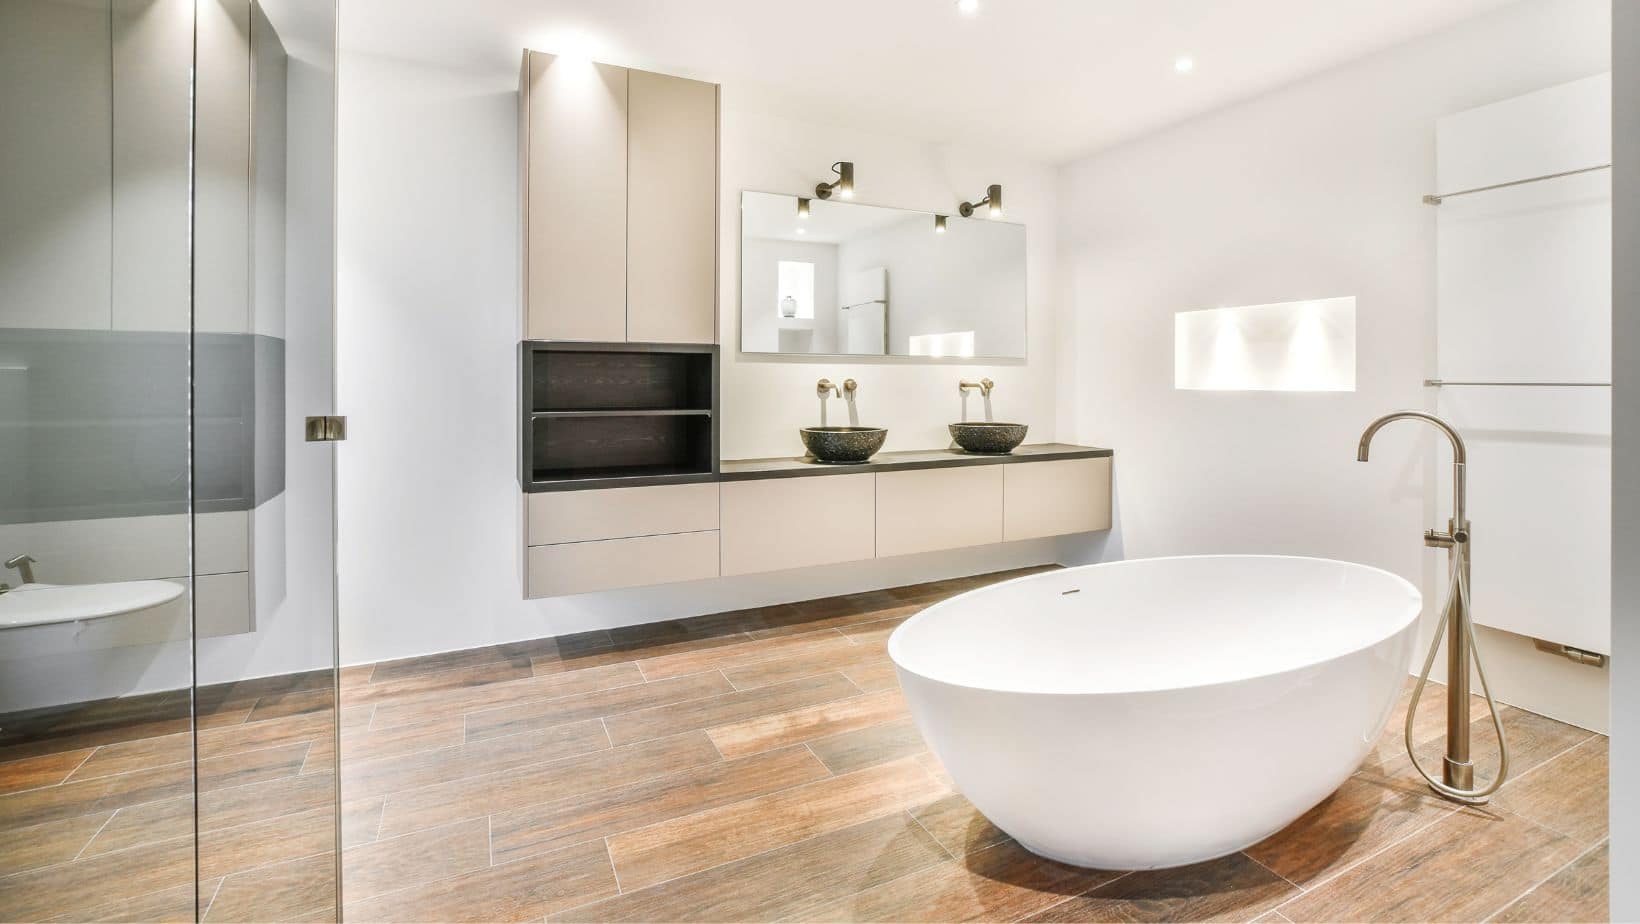 Spacious modern bathroom style with cream floating vessel sink cabinets and a bath tub.